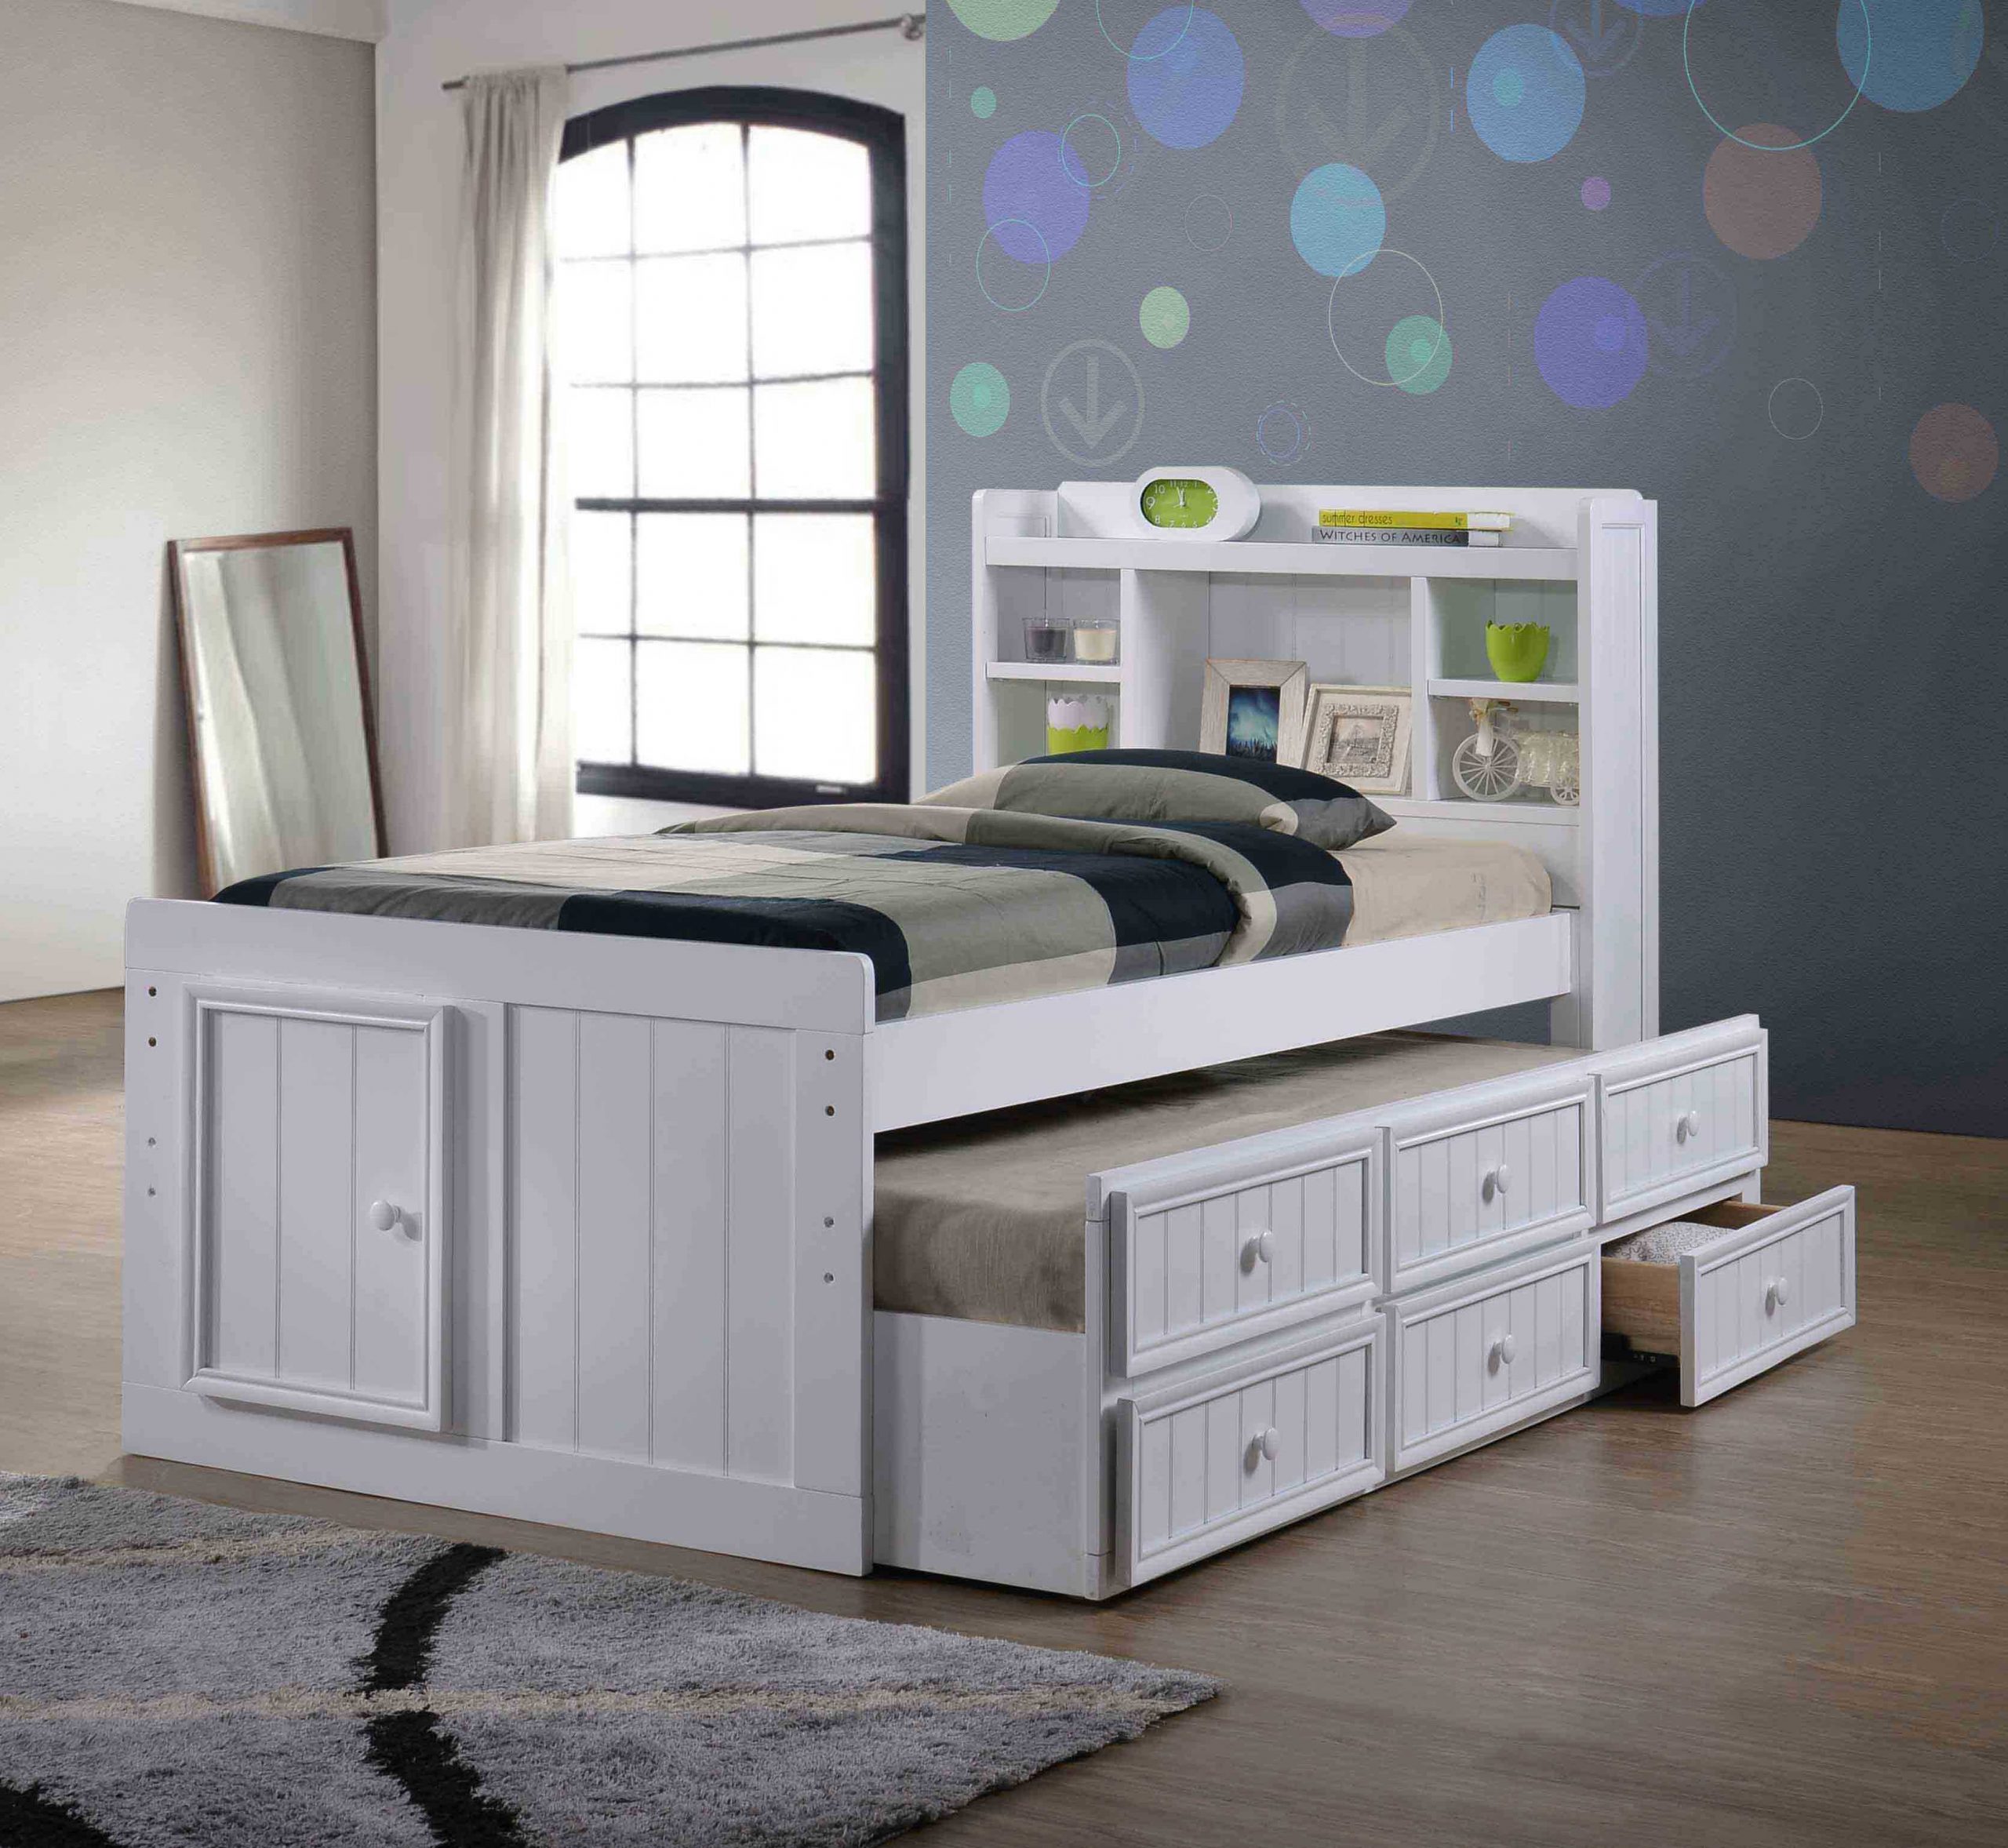 Twin XL Bed Frame With Drawers Design To Save Space And Maximizing Room | Roy Home Design